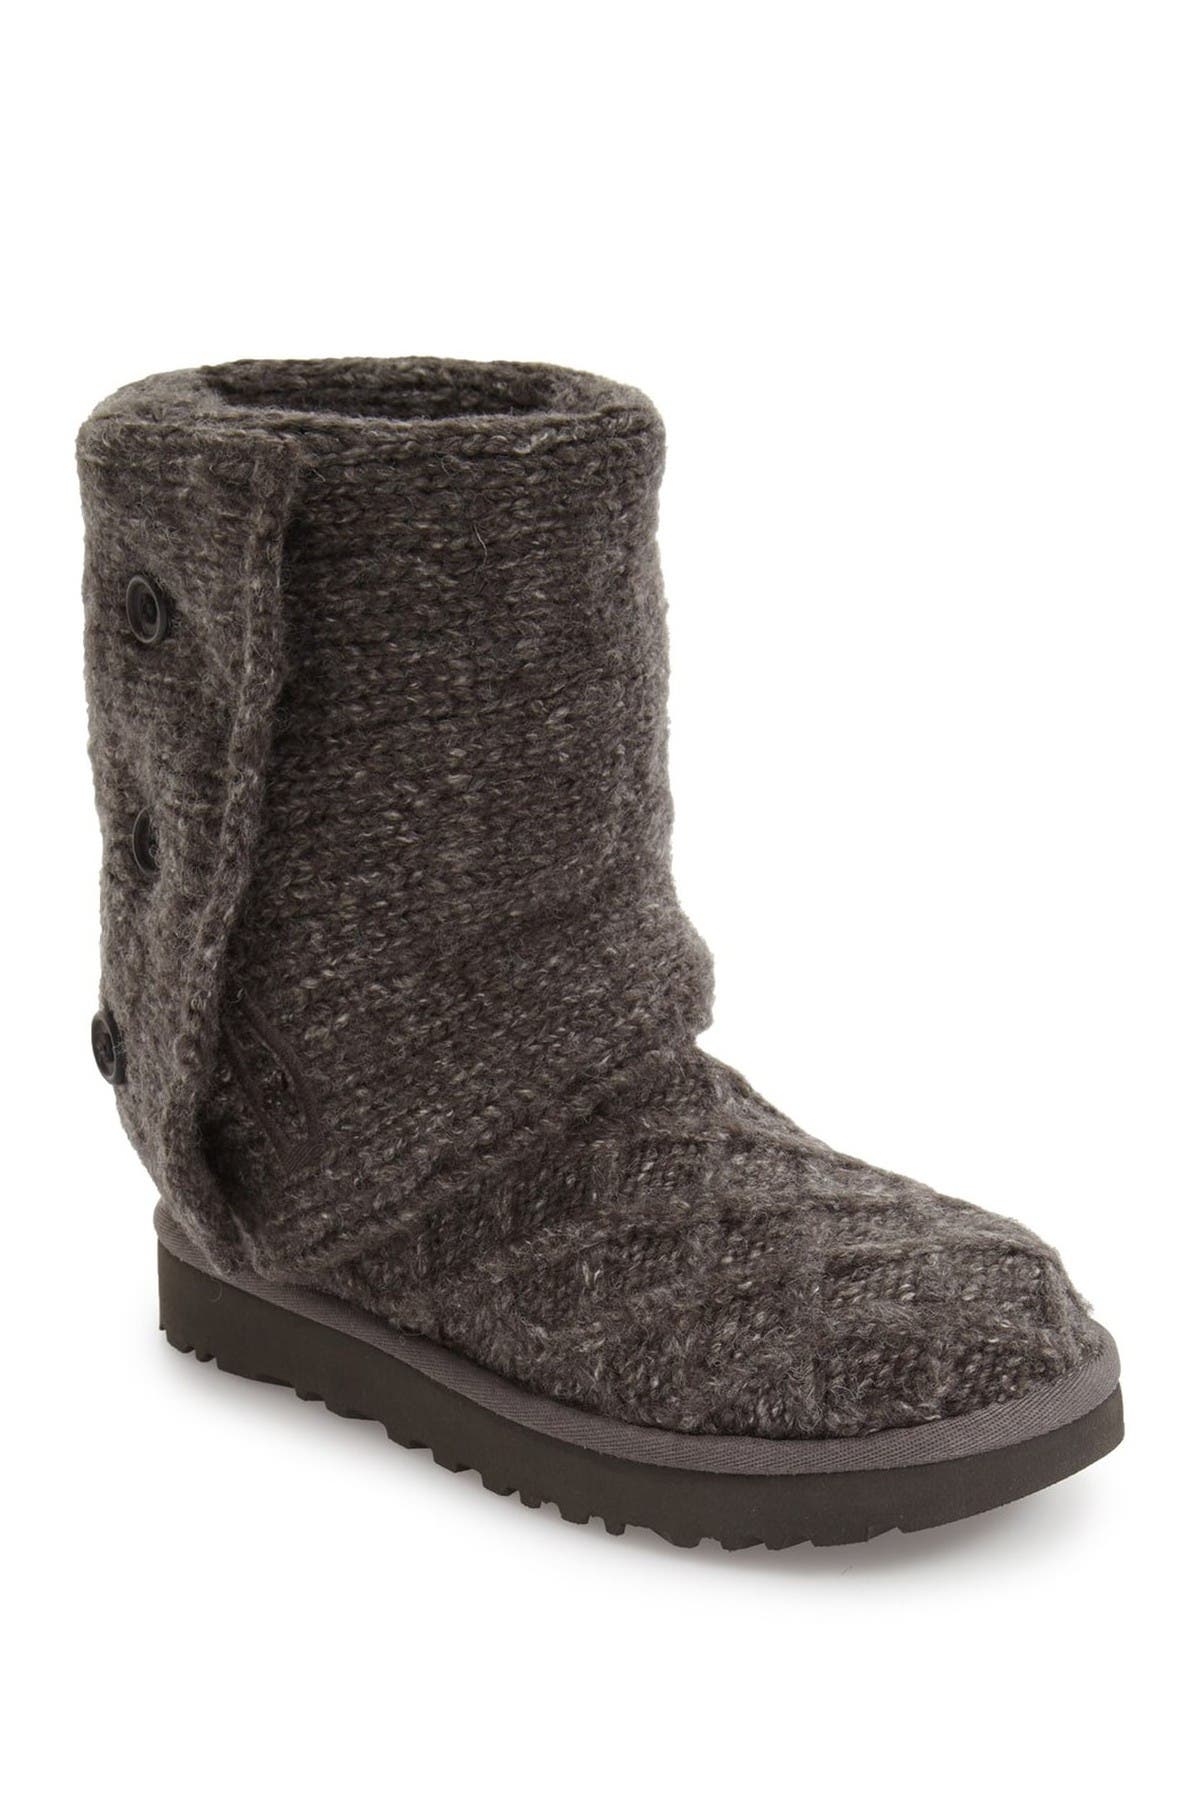 ugg cardy sweater boots